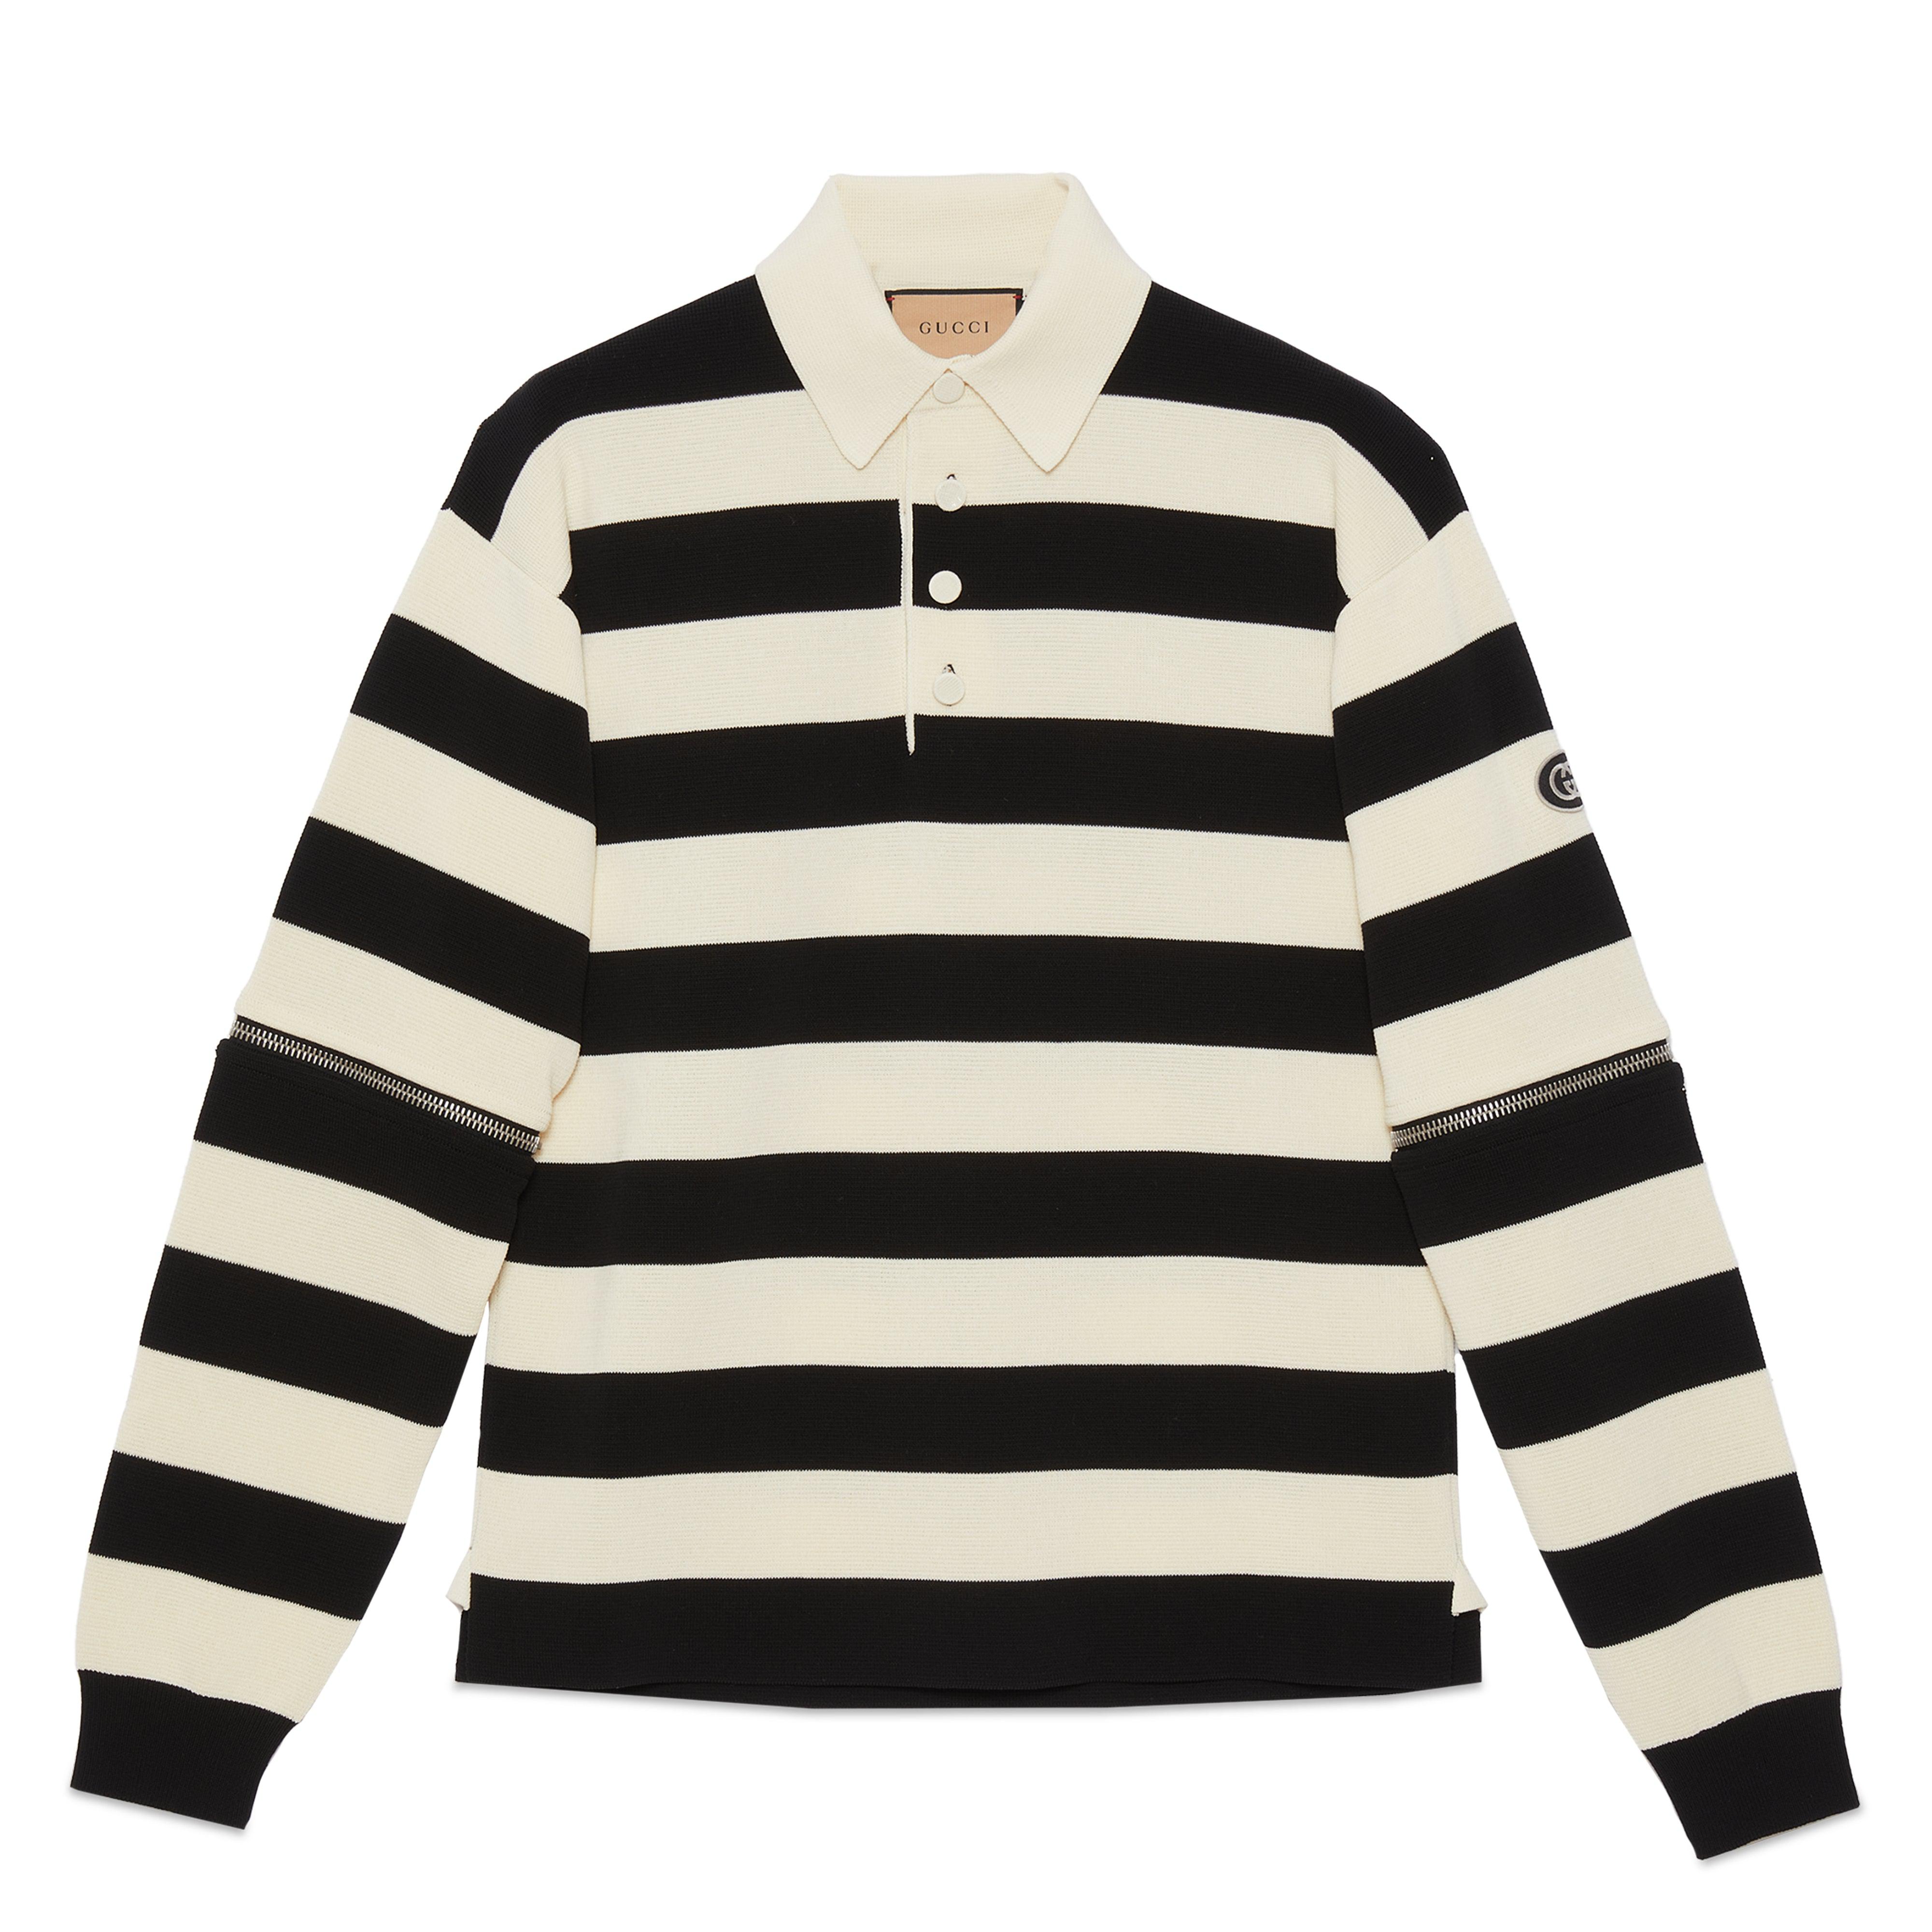 Gucci Men's Detachable Sleeves Knit Polo (White/Black) by GUCCI